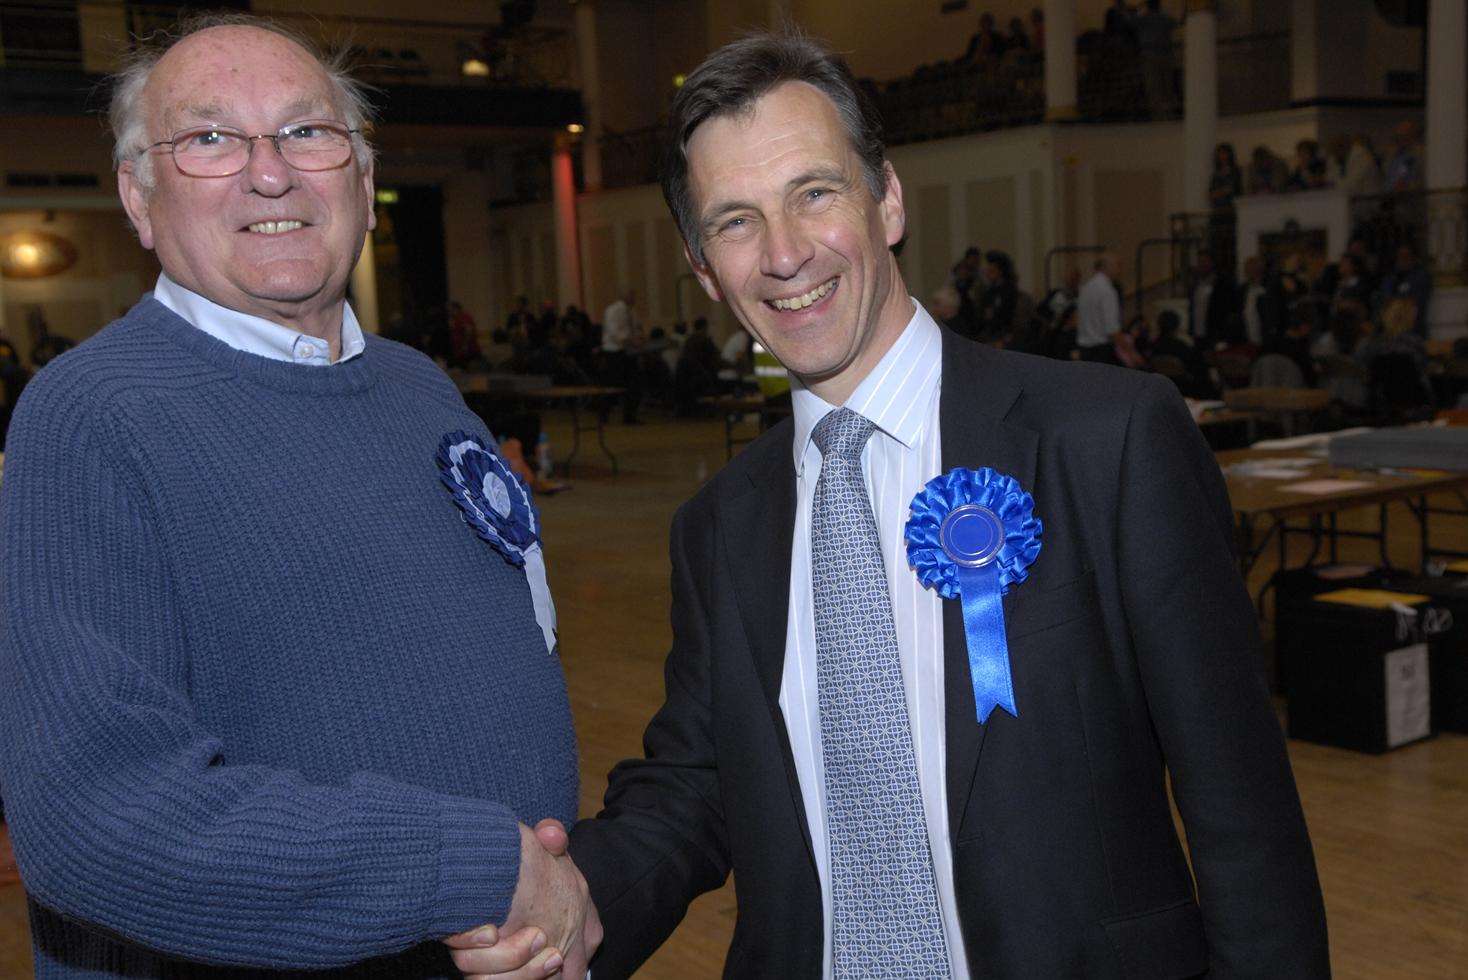 Cllr George Bunting with Cllr Rory Love, both re-elected to the Folkestone Harvey West district ward in 2011.